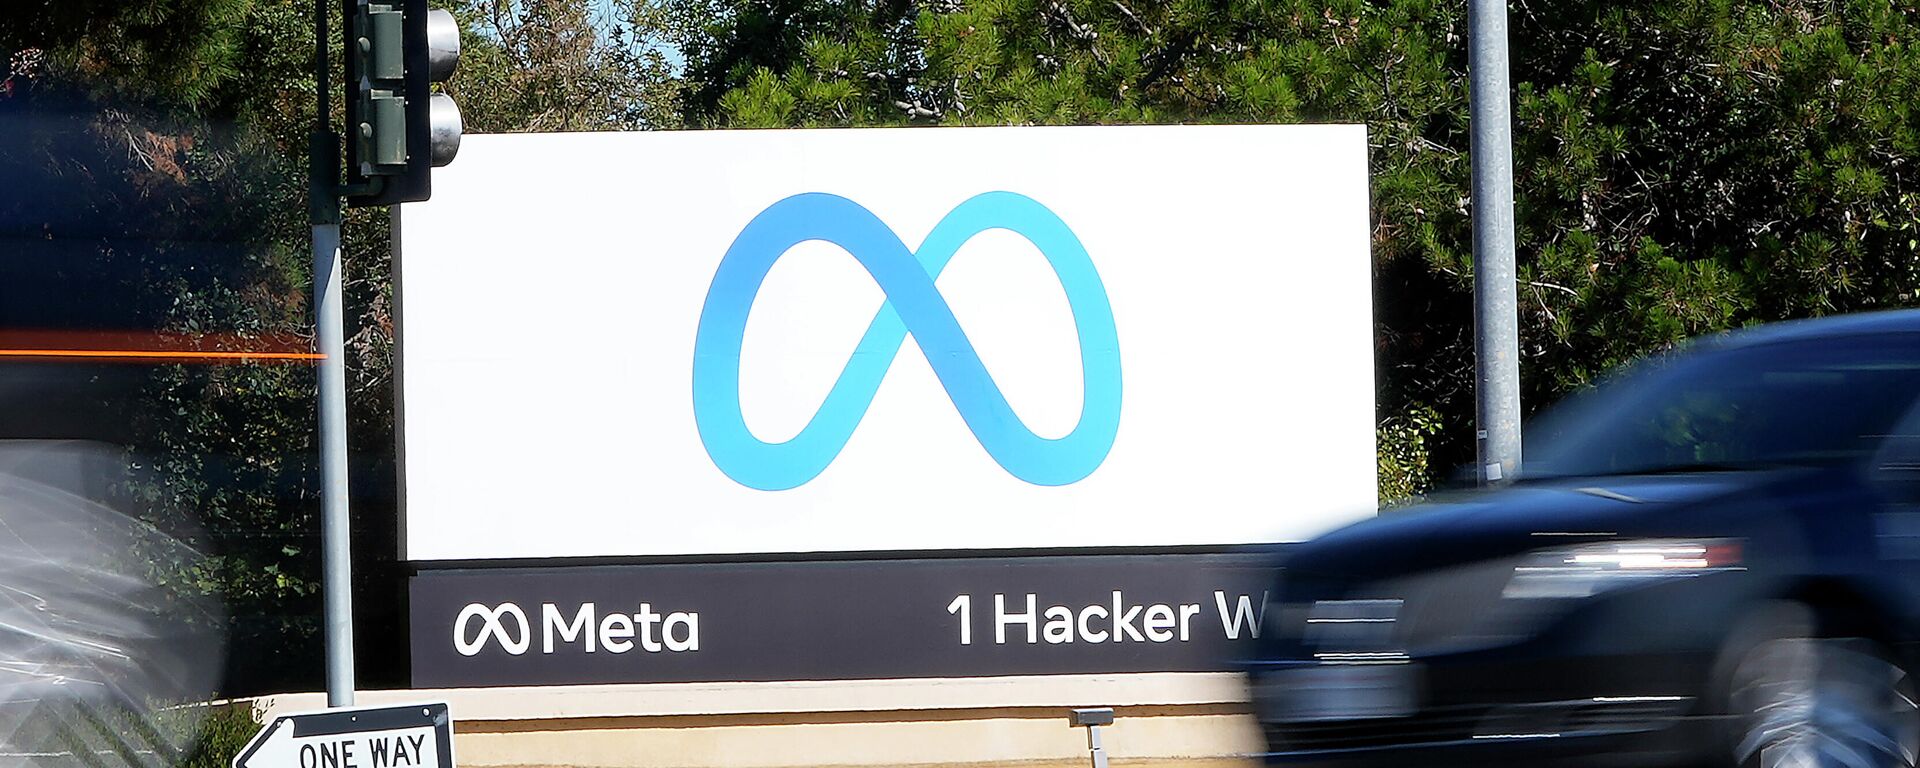 Facebook unveiled its new Meta sign at the company headquarters in Menlo Park, Calif., on Oct. 28, 2021. Facebook parent company Meta Platforms Inc. settled a decade-old class action lawsuit on Tuesday, Feb. 15, 2022, over the company’s use of “cookies” in 2010 and 2011 that tracked people online even after they logged off the Facebook platform. As part of the proposed settlement, which must still be approved by a judge, Meta agreed to delete all the data it wrongfully collected during the period.  - Sputnik International, 1920, 15.12.2022